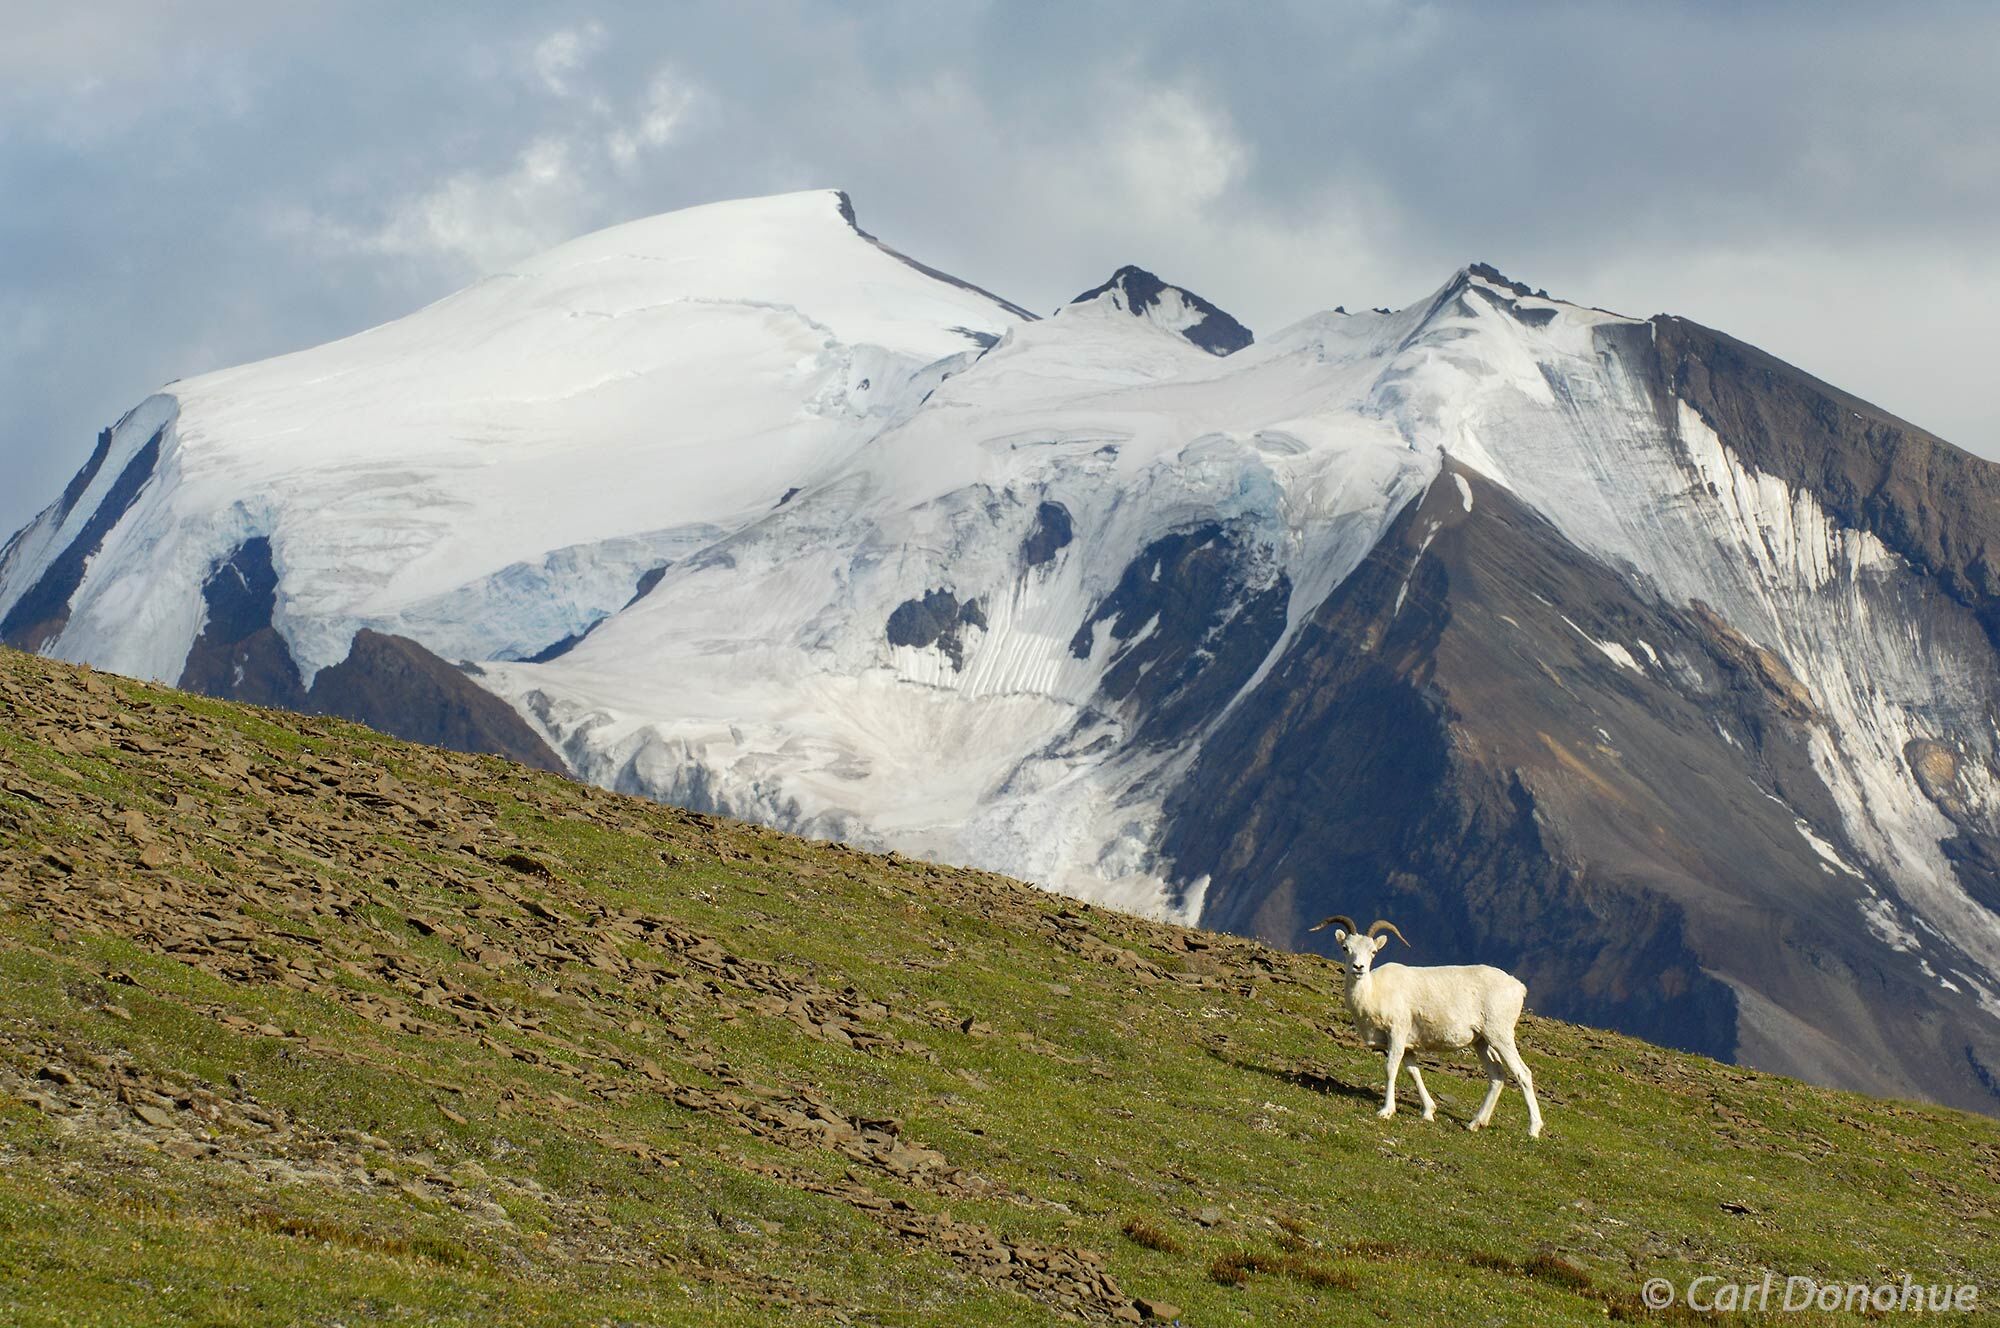 Dall sheep ewe, or female Dall sheep, in the Wrangell Mountains of Wrangell-St. Elias National Park, Alaska. Dall sheep frequent...